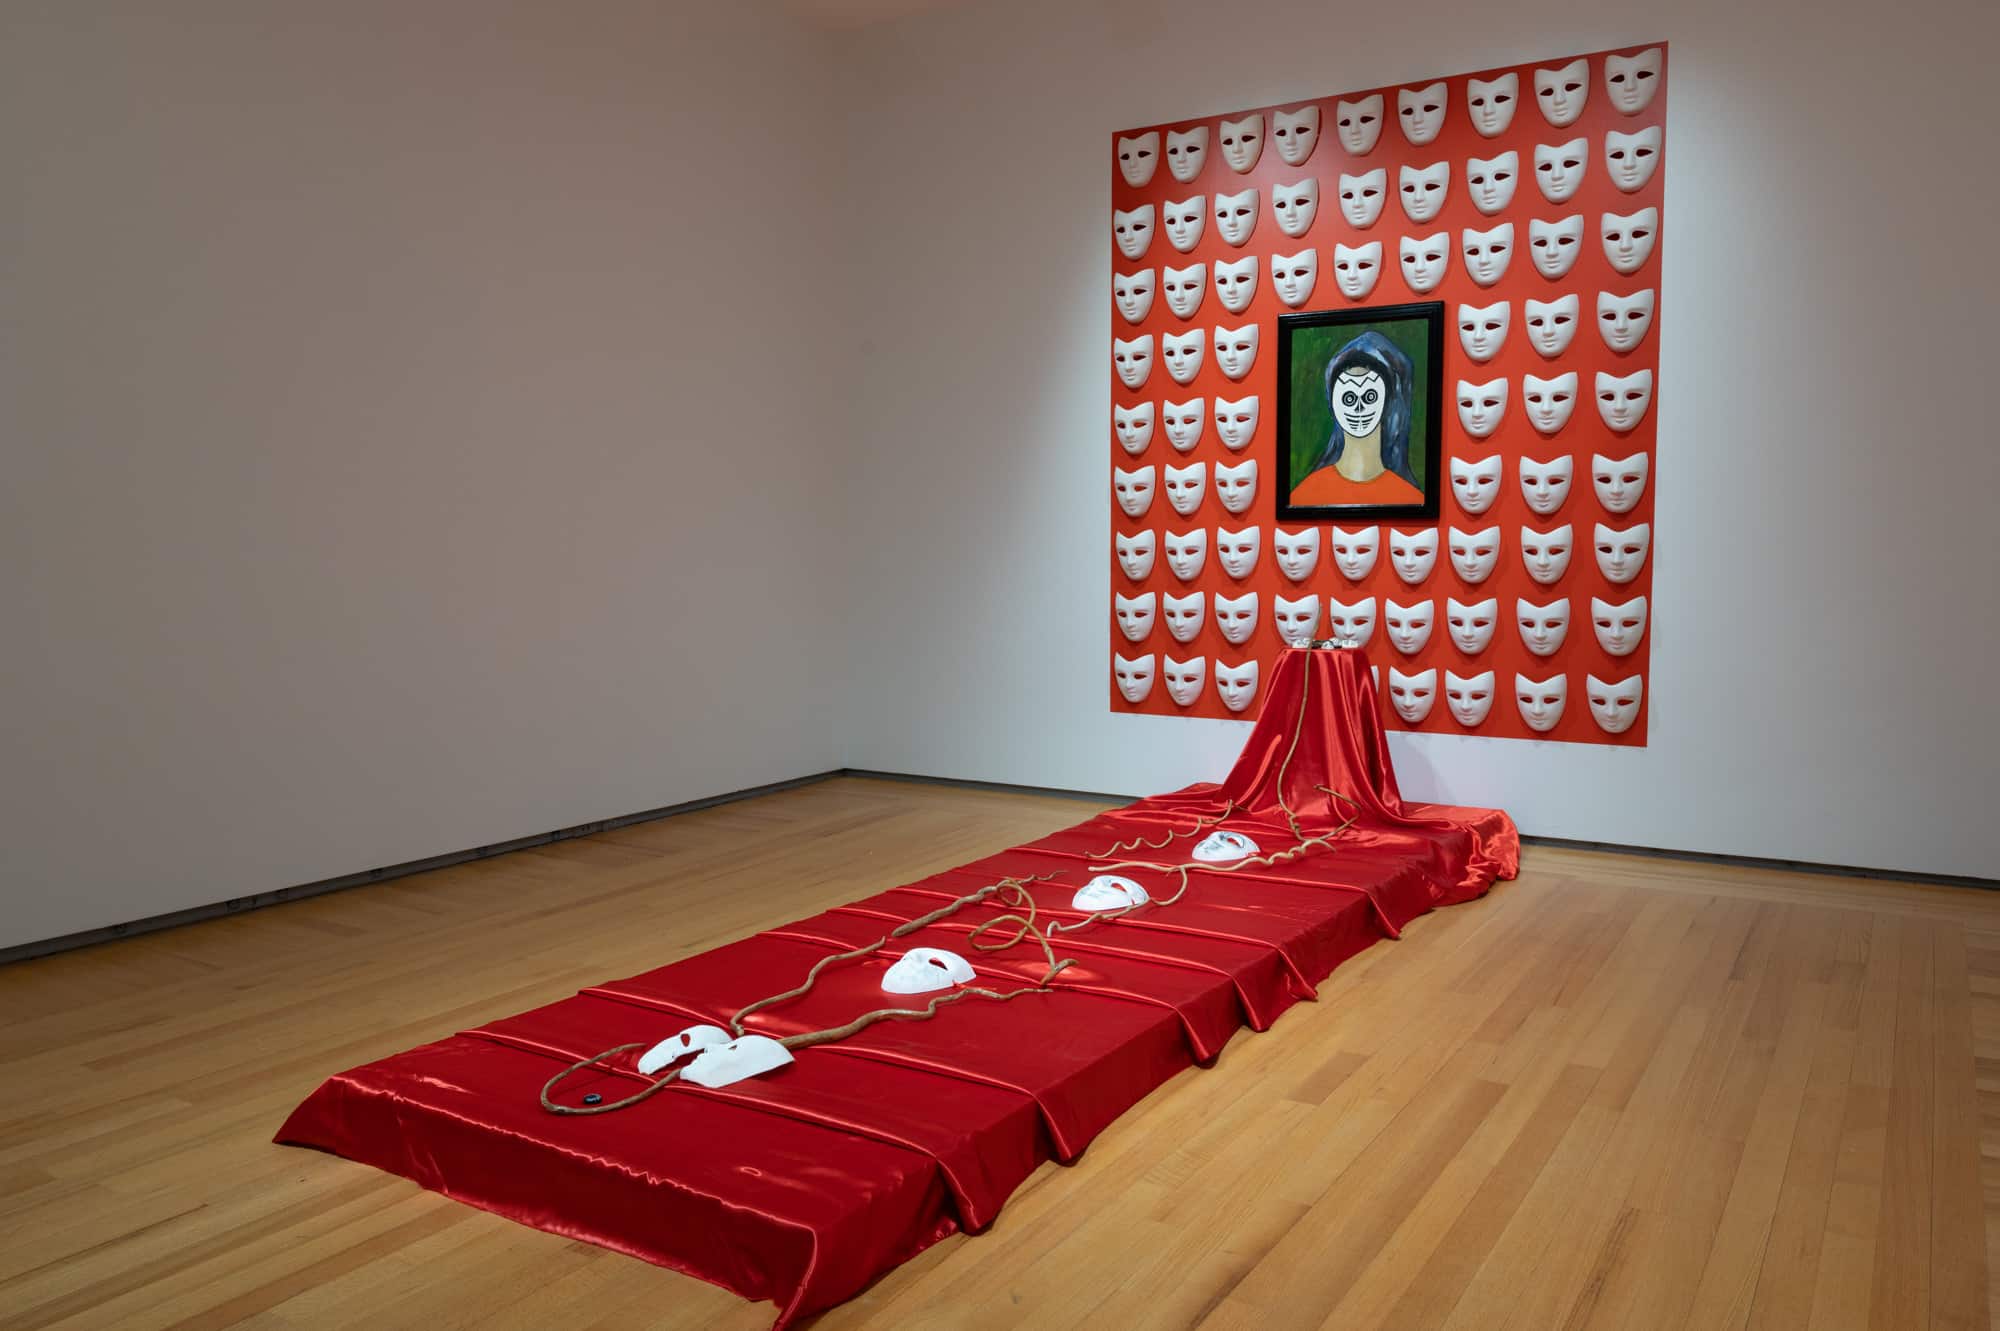 Installation image of Winsom Winsom's The Masks We Wear, 2018. Shows a long, low plinth on the floor covered in red satin fabric upon which are white masks entwined with cord. There is a small altar that the cord reaches up to. Behind this is a red square on the wall which is superimposed with rows of the white masks. In the middle is a painting of a figure wearing a mask in a black frame.